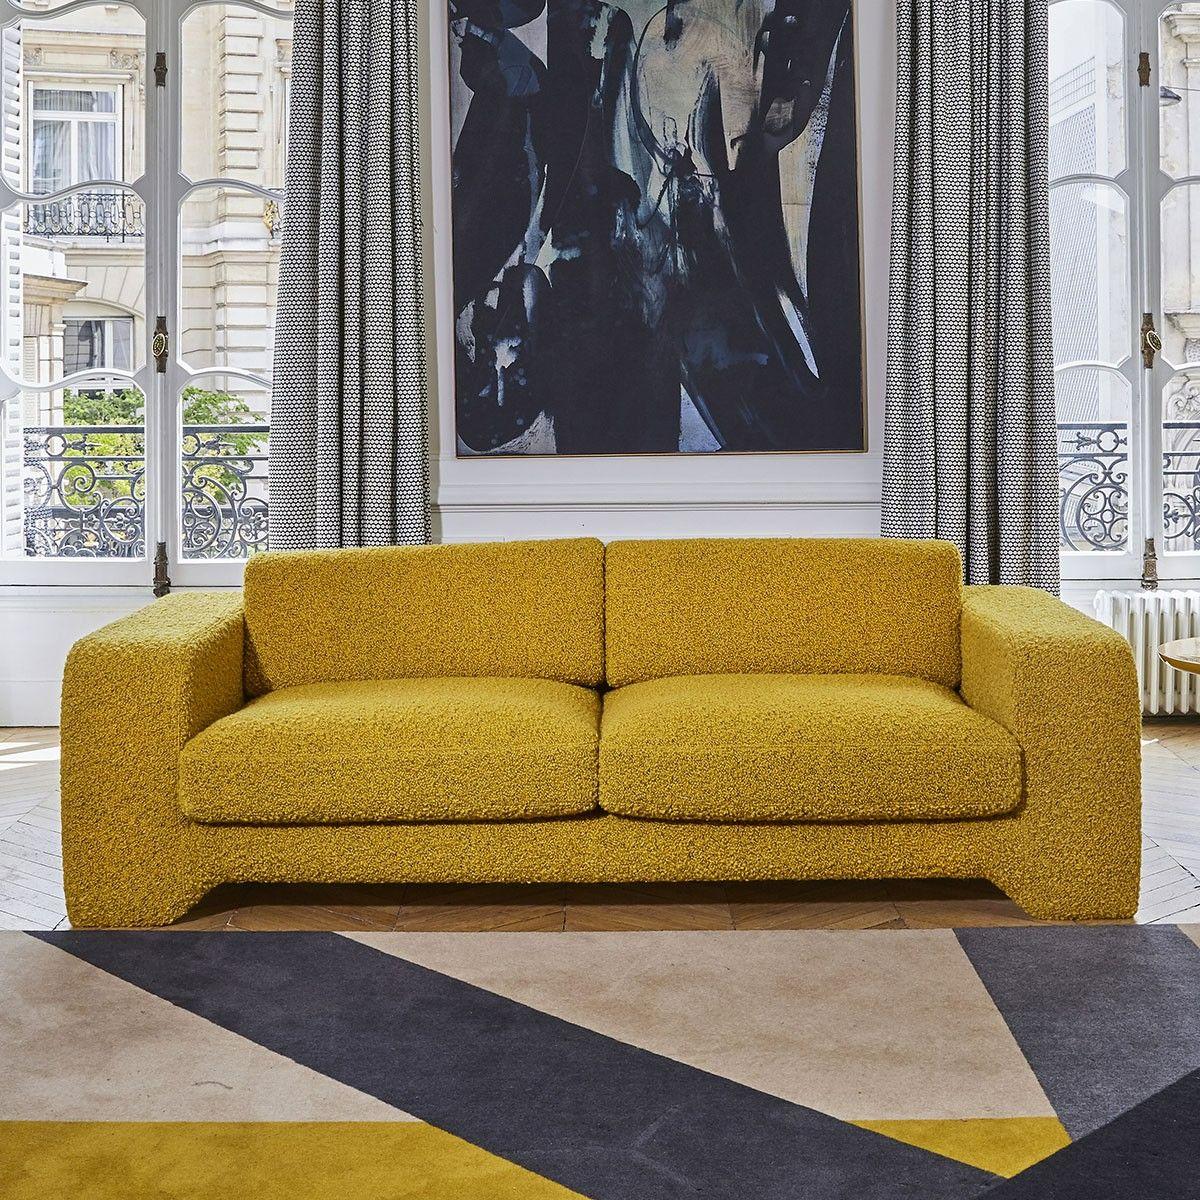 Popus Editions Giovanna 4 Seater Sofa in Marine Navy Como Velvet Upholstery

Giovanna is a sofa with a strong profile. A sober, plush line, with this famous detail that changes everything, so as not to forget its strength of character and this